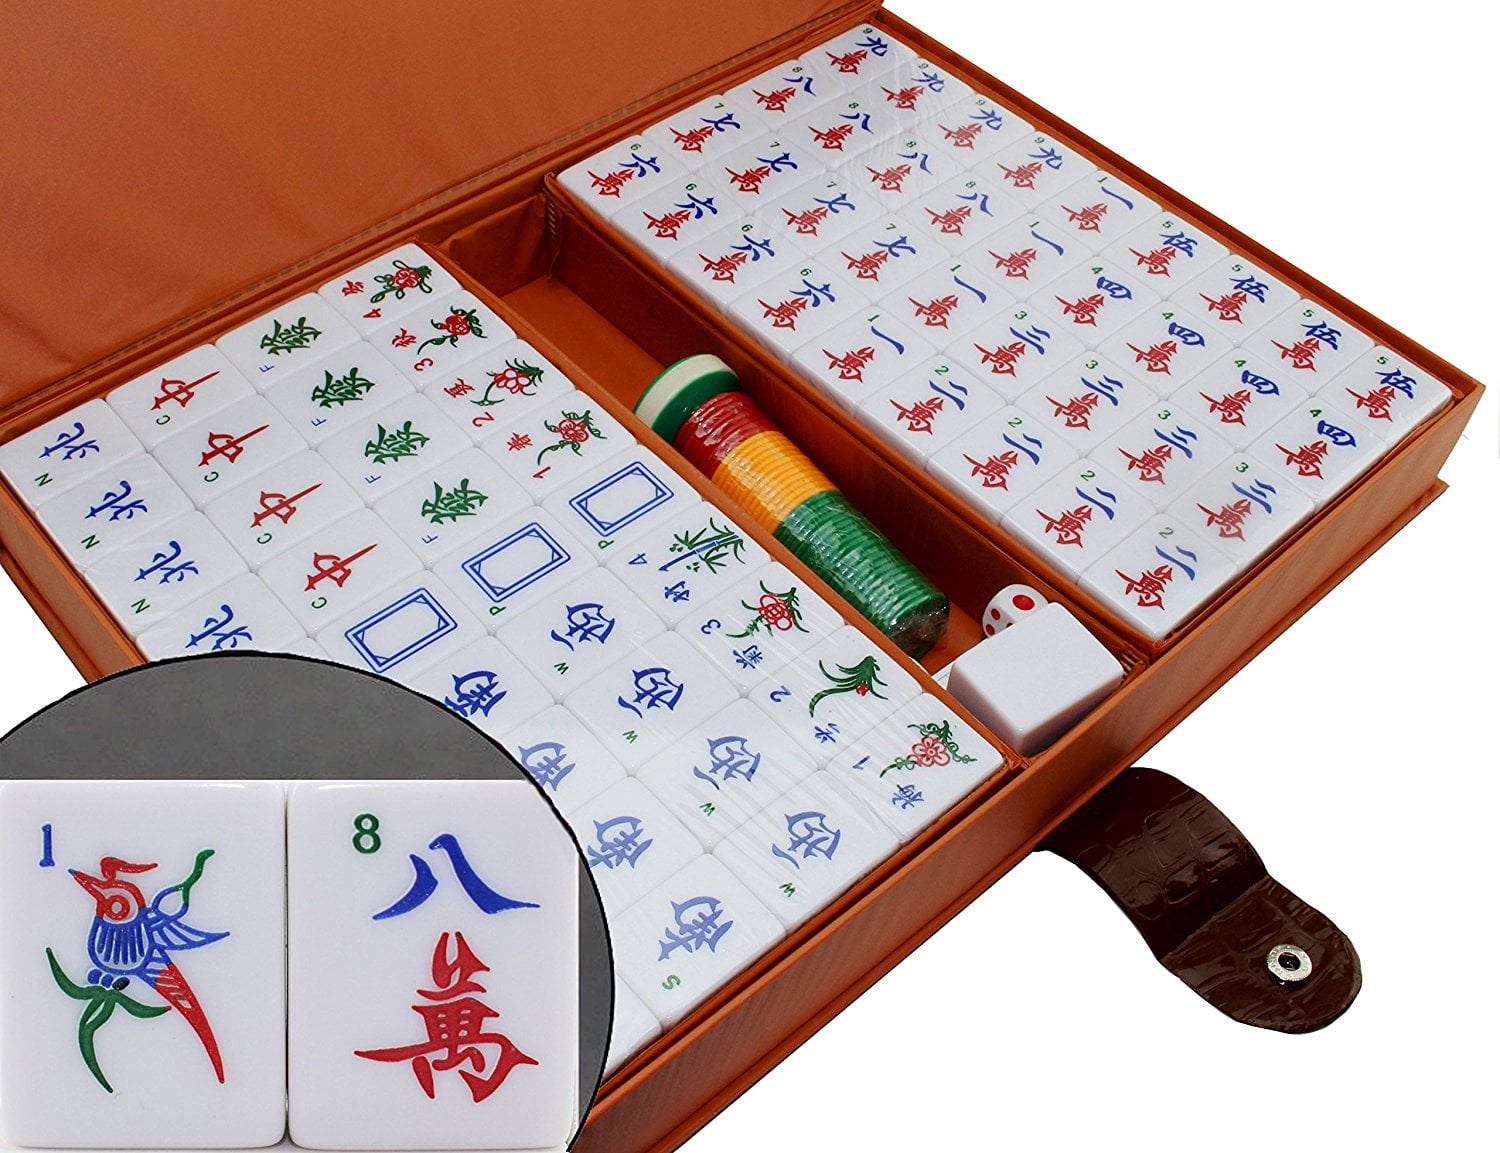 YOT Mahjong Mah Jongg 144 Chinese Numbered Tiles Traditional Mahjong Set With Wooden Box Board Games Tiles Games Complete Majong Game Sets For Travel Party Family Game Gift 